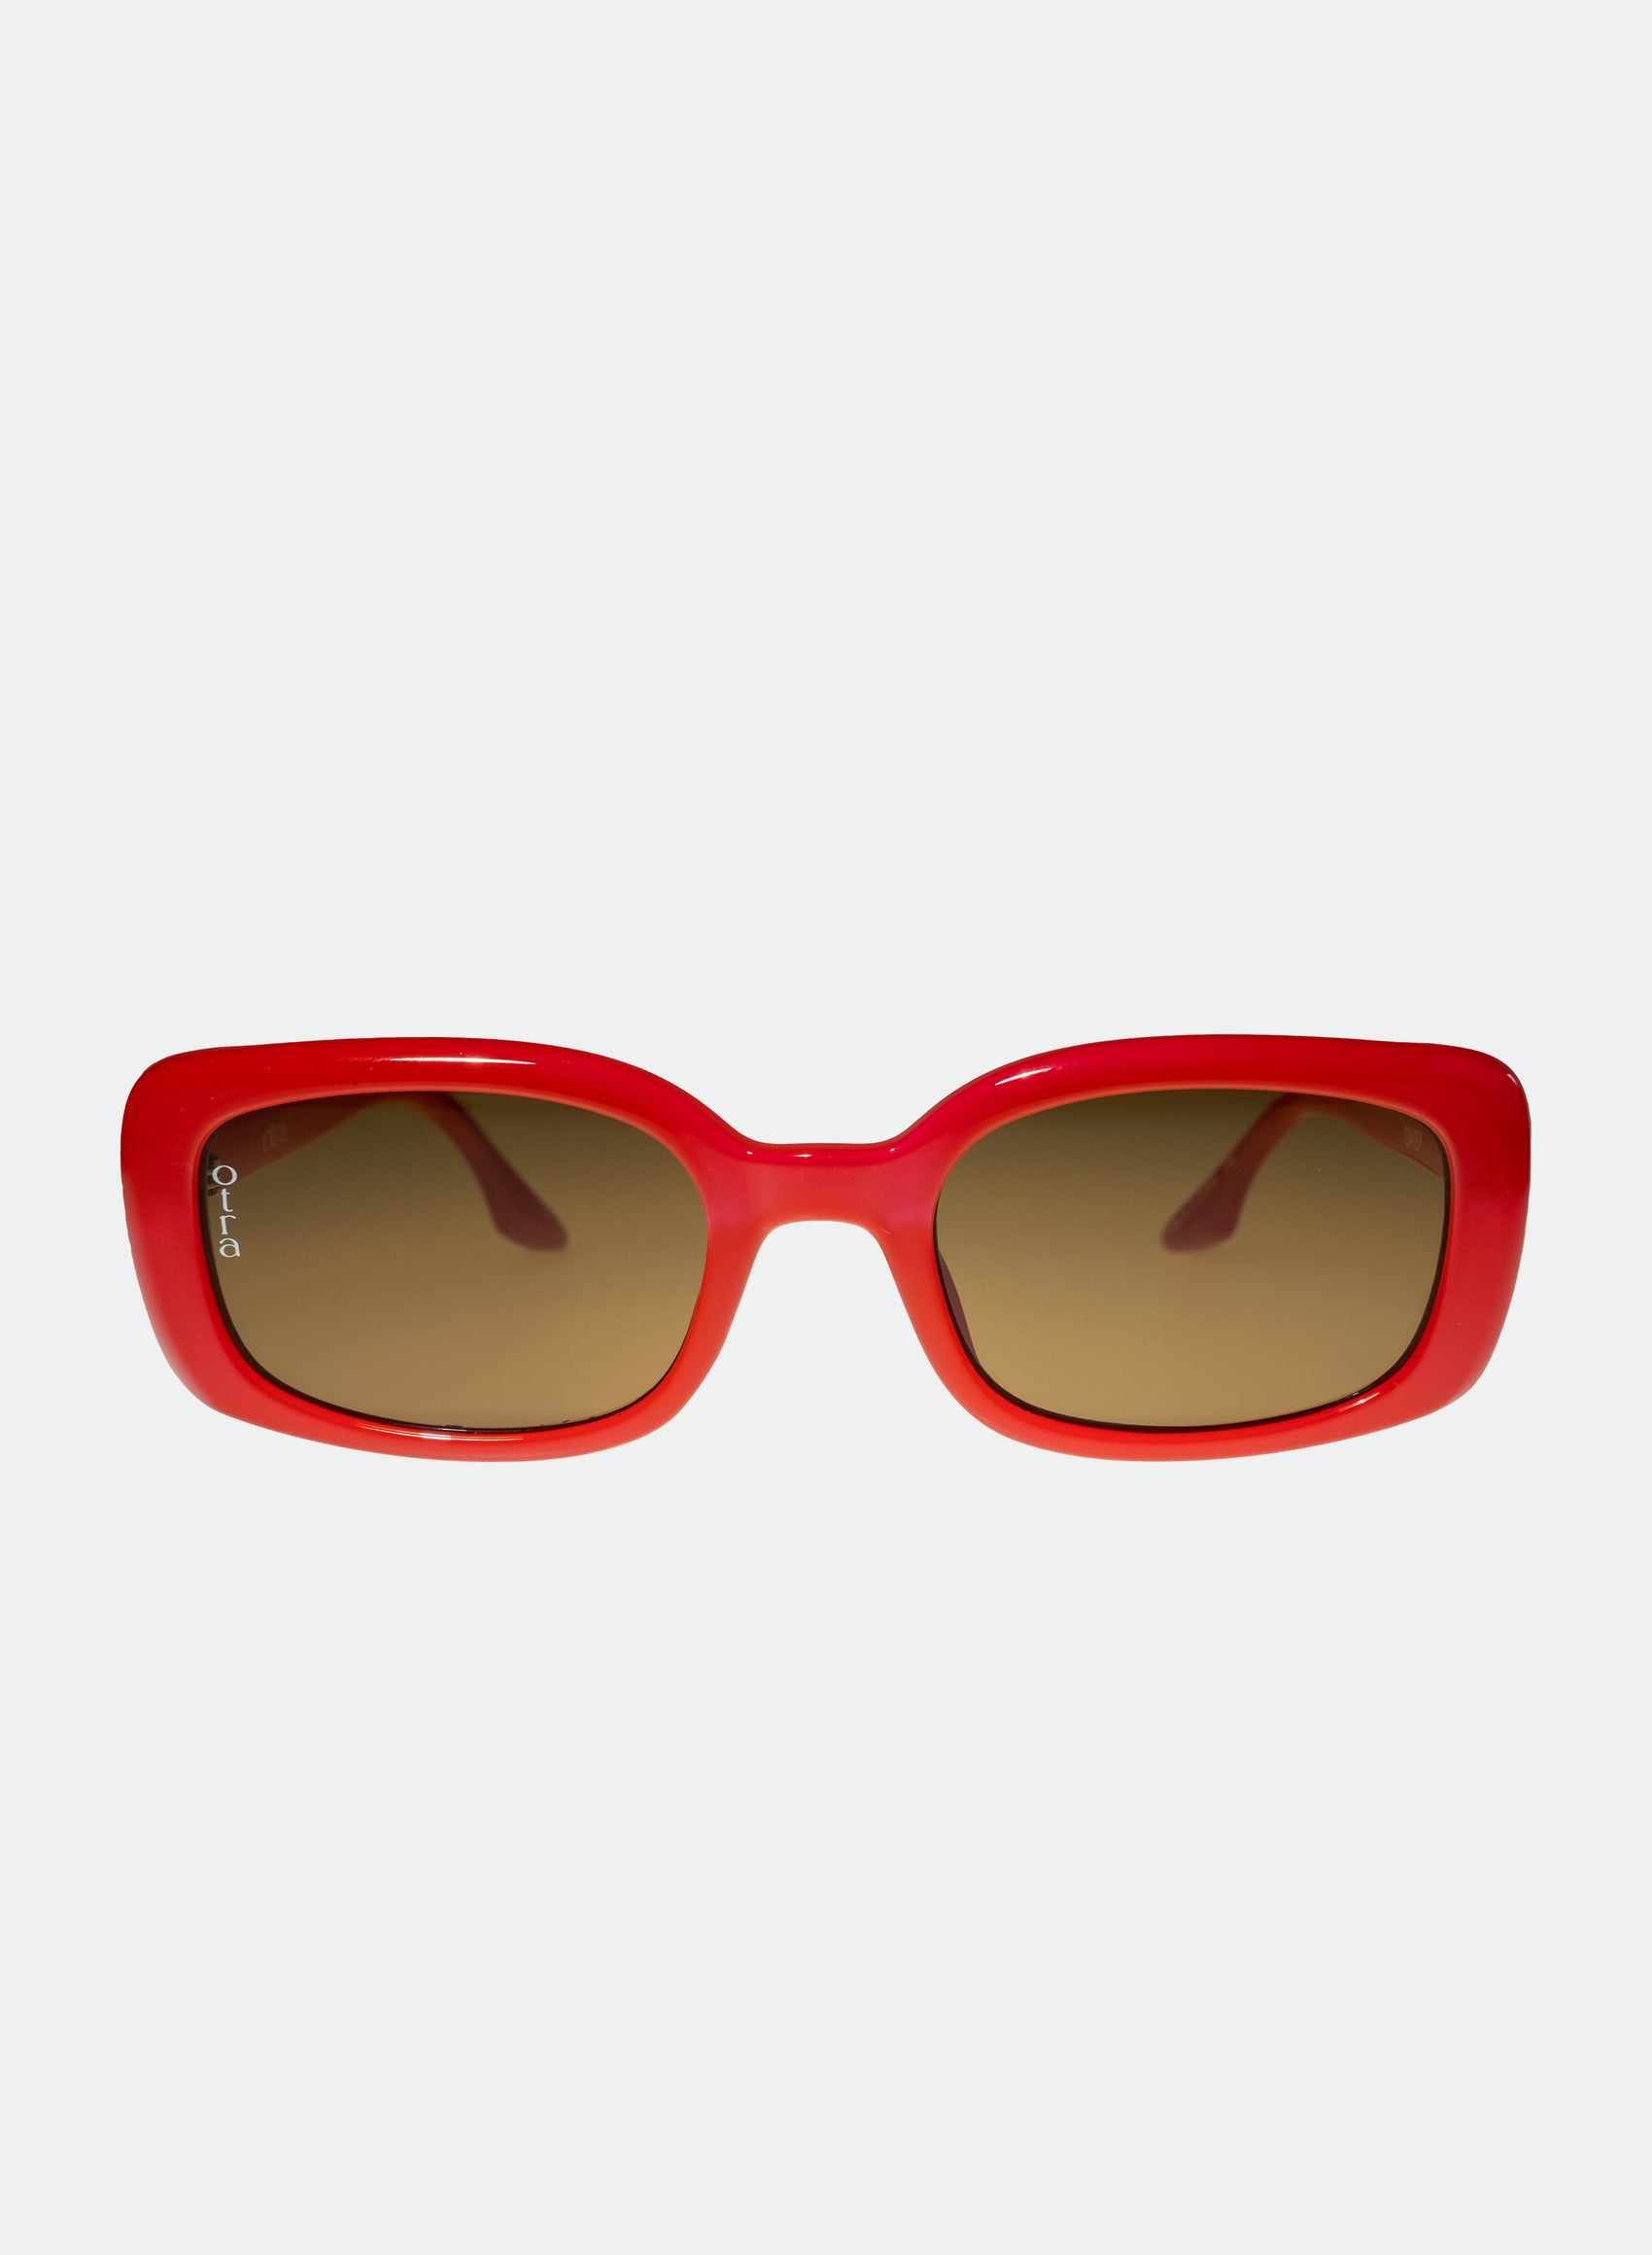 Daisy small rounded rectangle frame in red